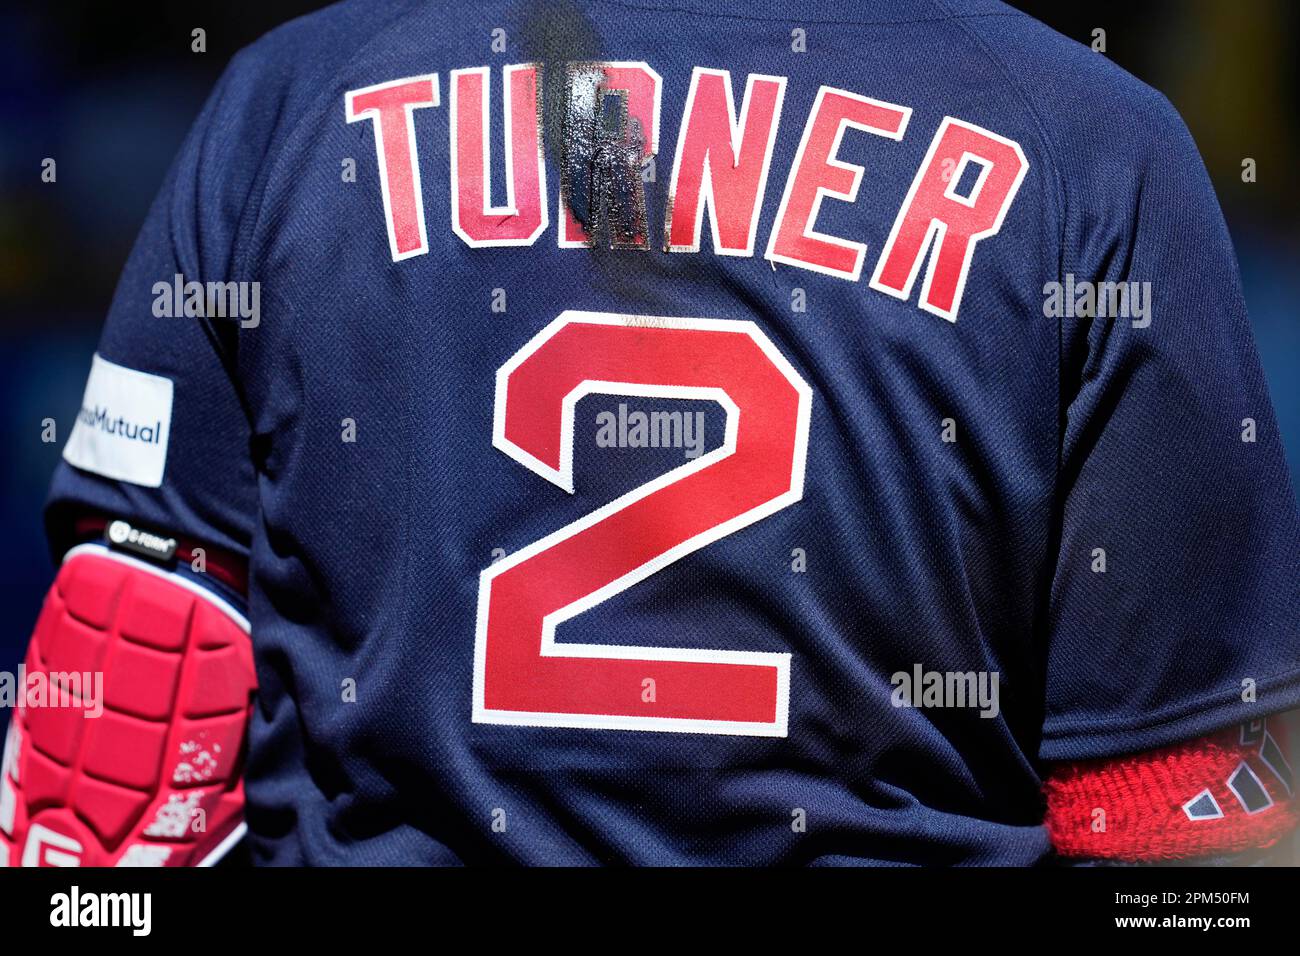 Pine tar is shown on the back of the jersey of Boston Red Sox